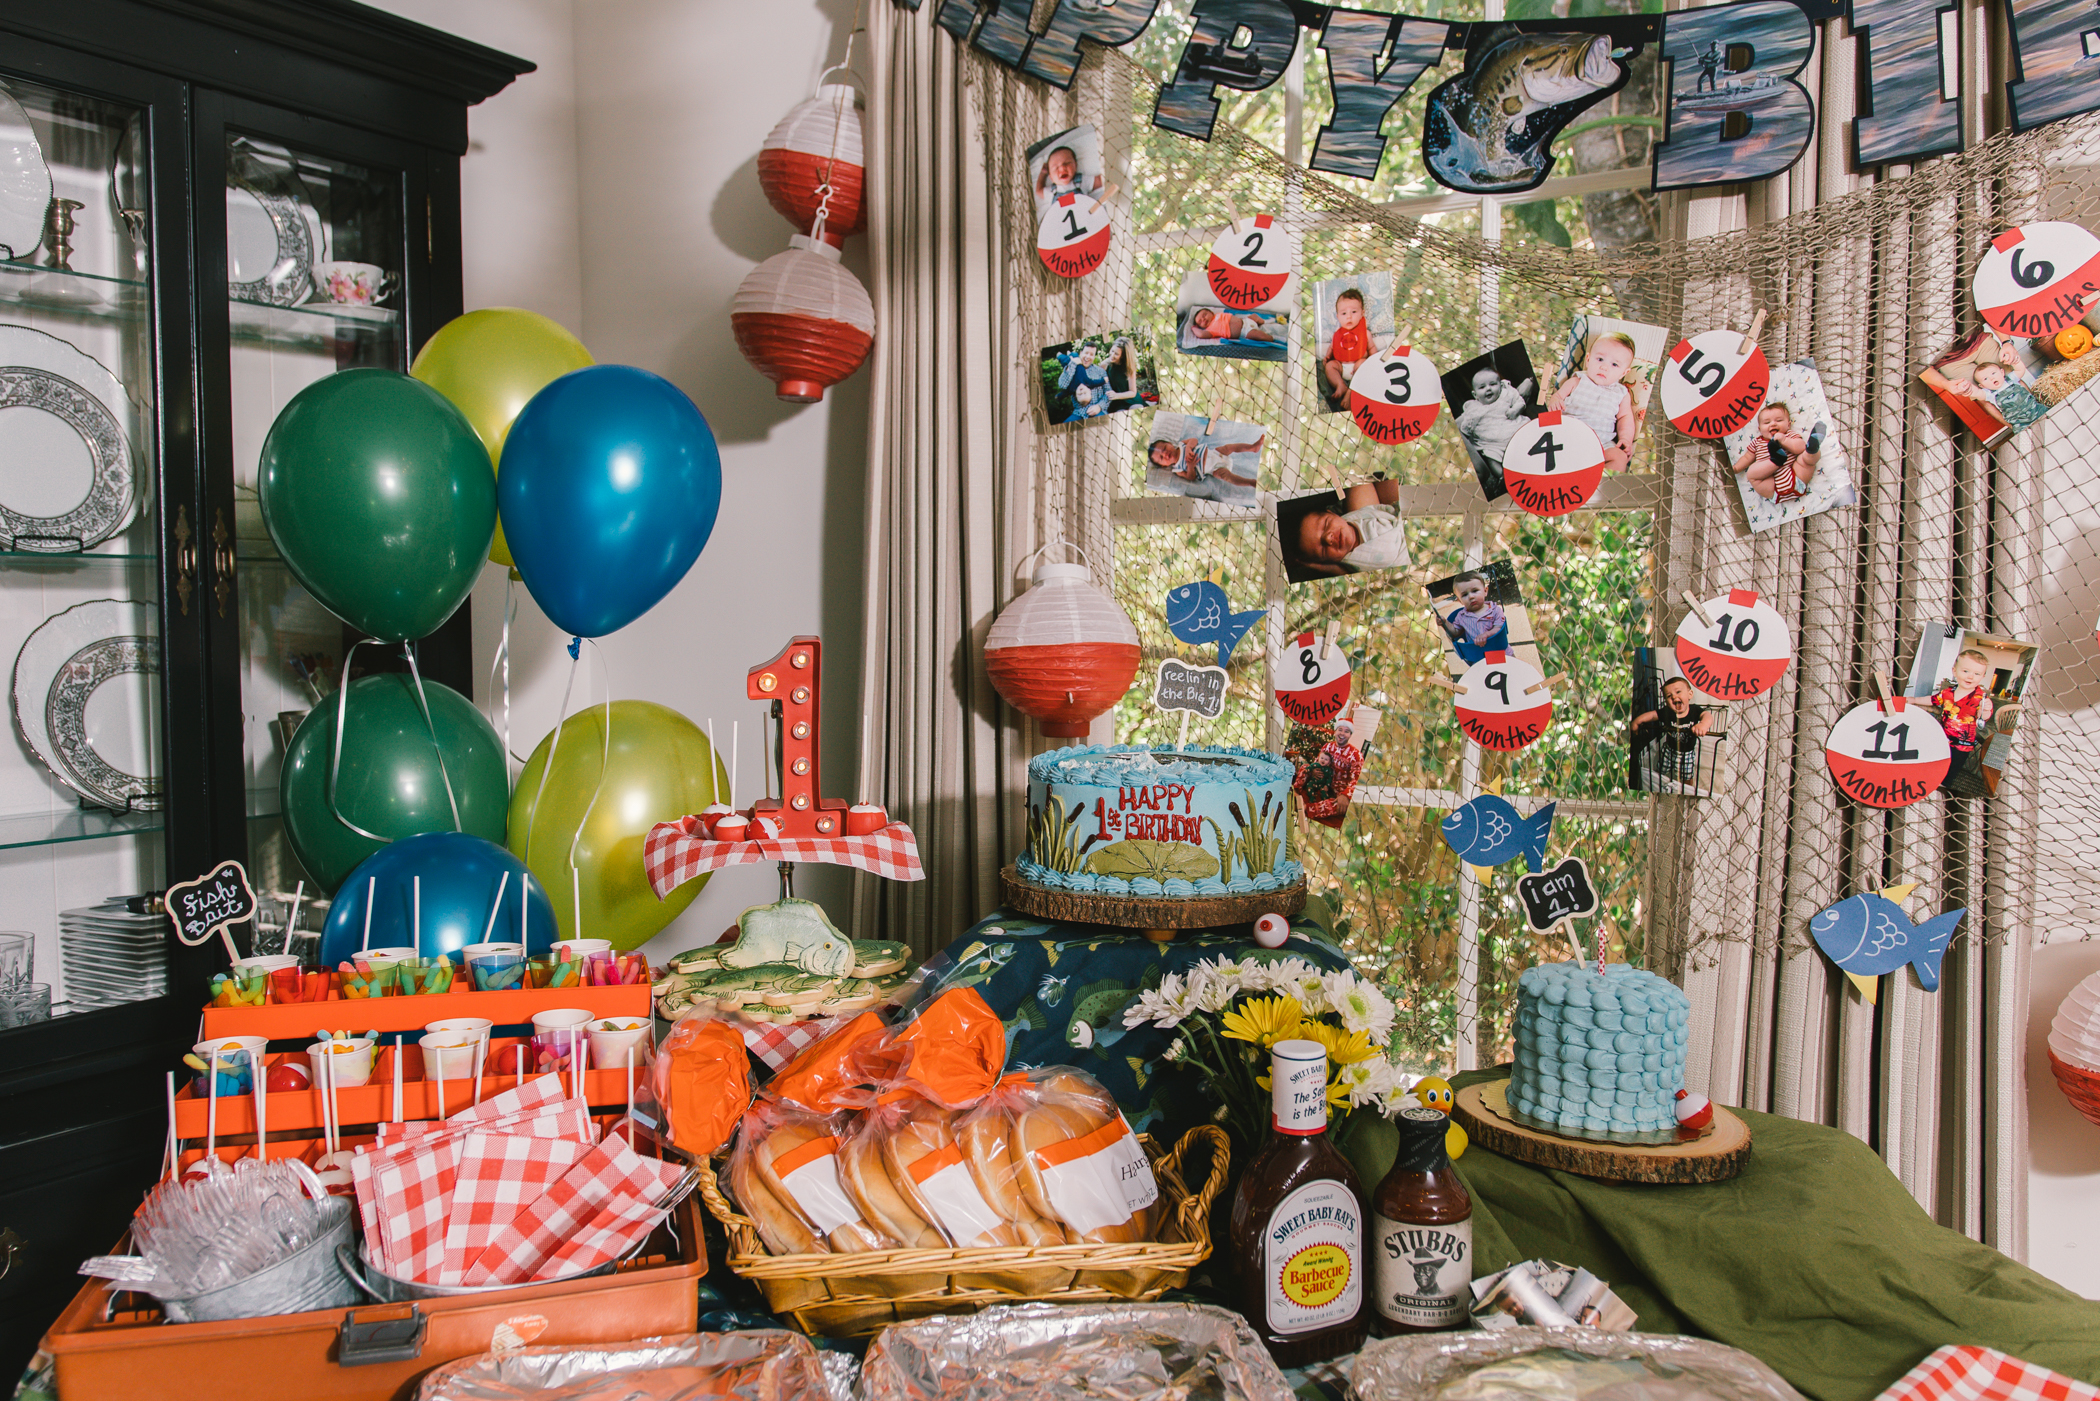 https://images.squarespace-cdn.com/content/v1/569722e8be7b96eb7f5fb677/1495052773409-NCRLHFYPQFX1AEBAUGGE/First-birthday-party%2C+decorataion-birthday-party-photo